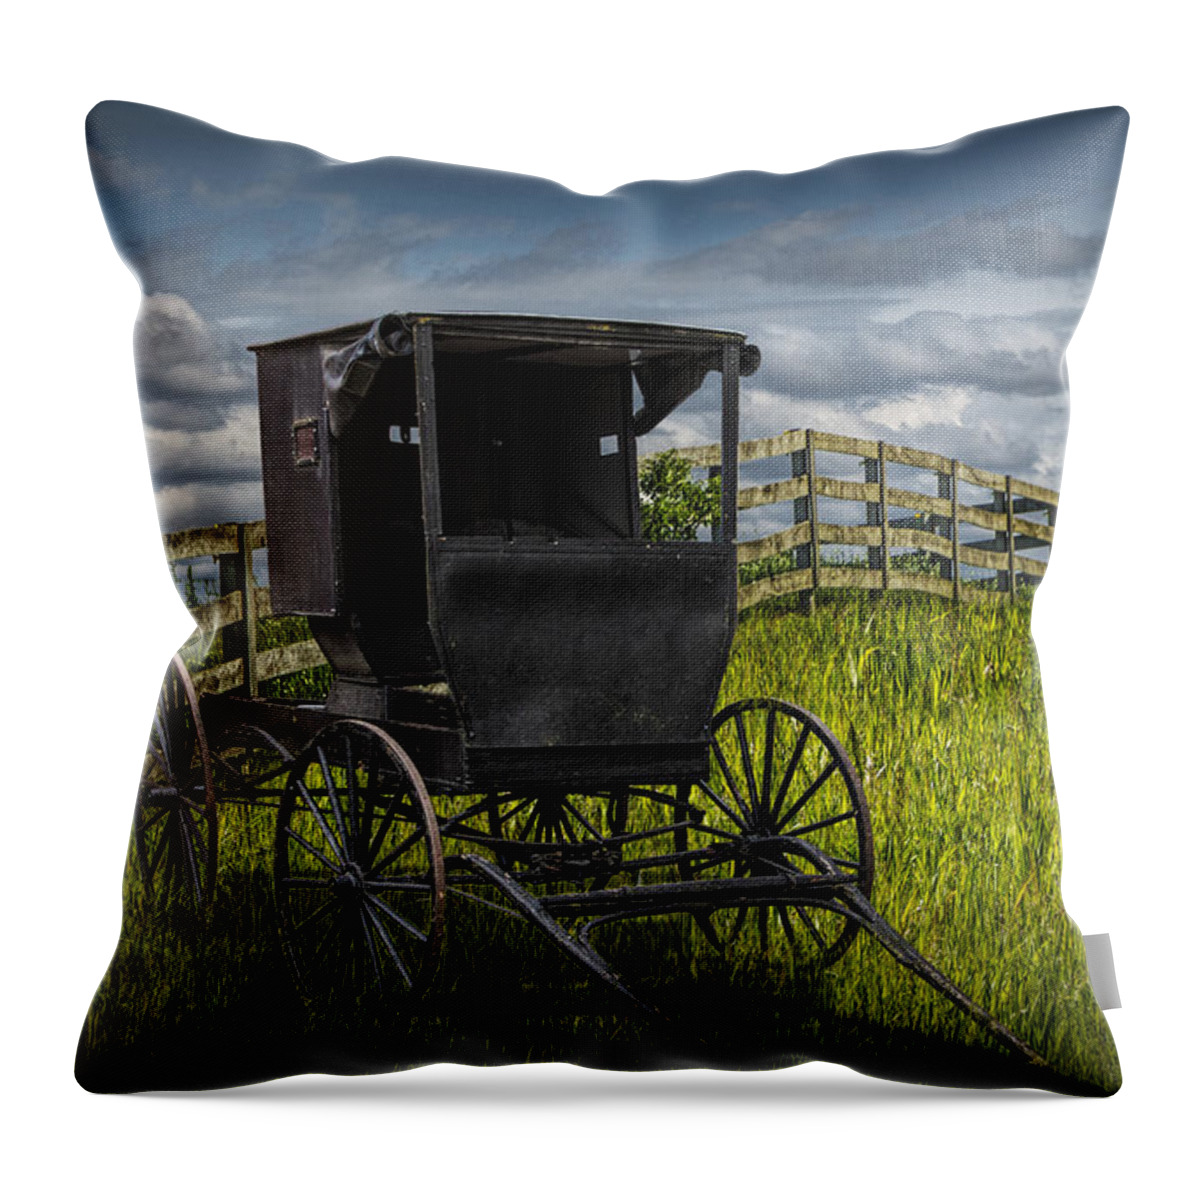 Amish Throw Pillow featuring the photograph Amish Horse Buggy by Randall Nyhof